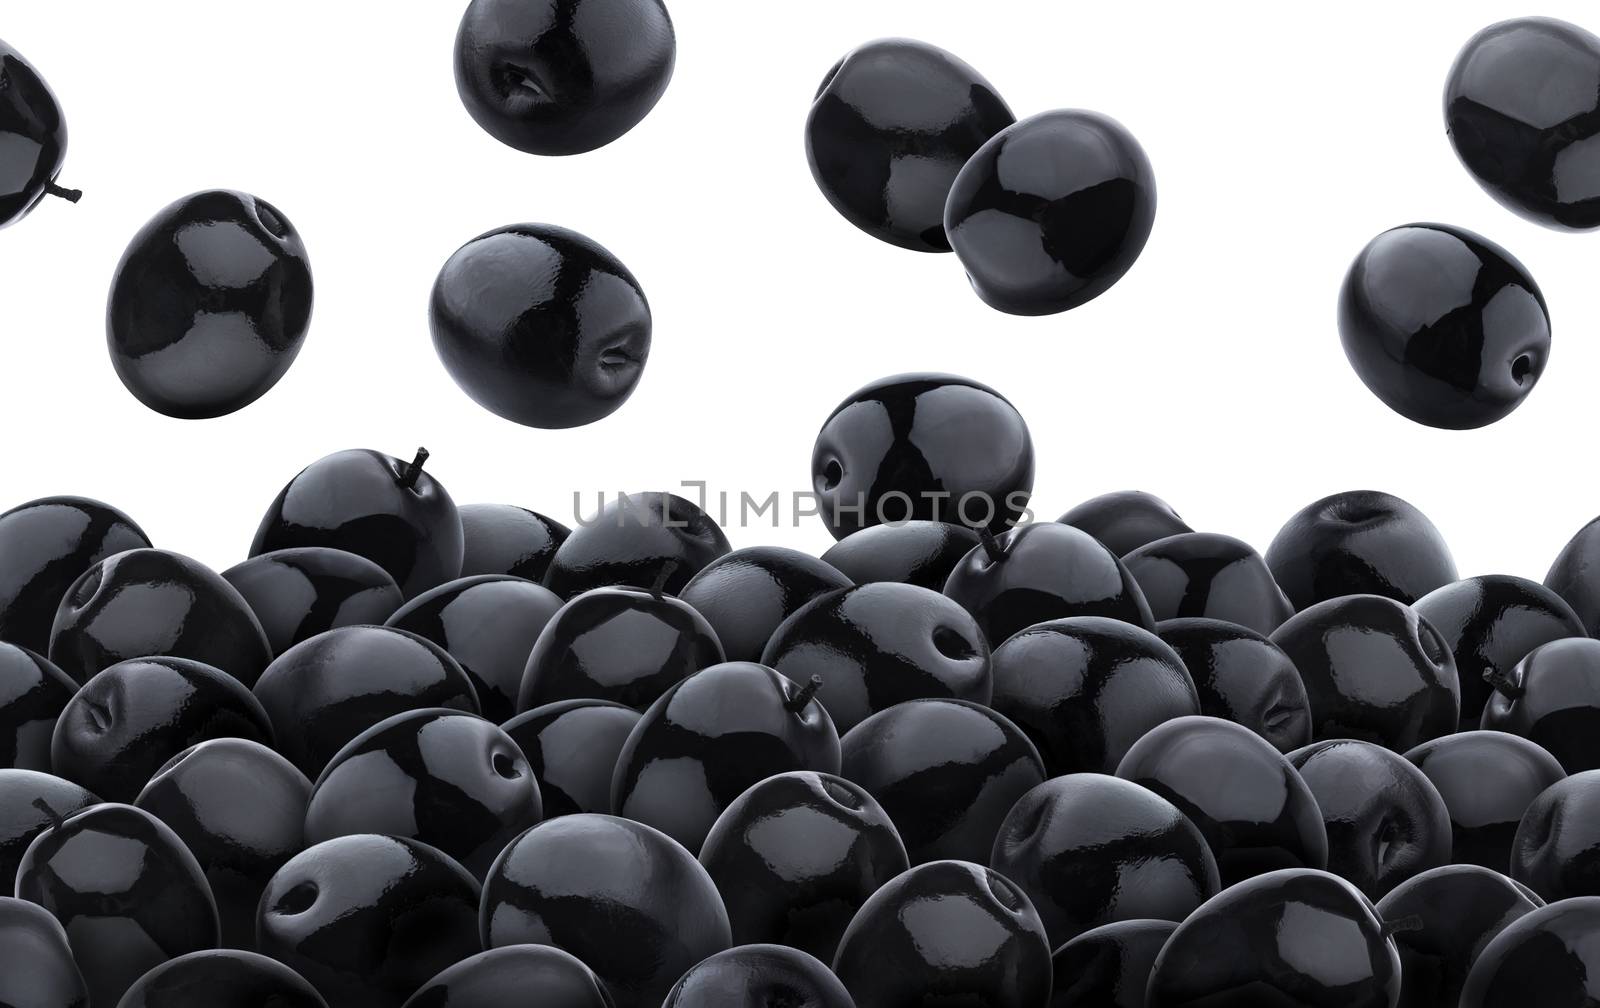 Black olives seamless pattern isolated on white background. Heap of black olives